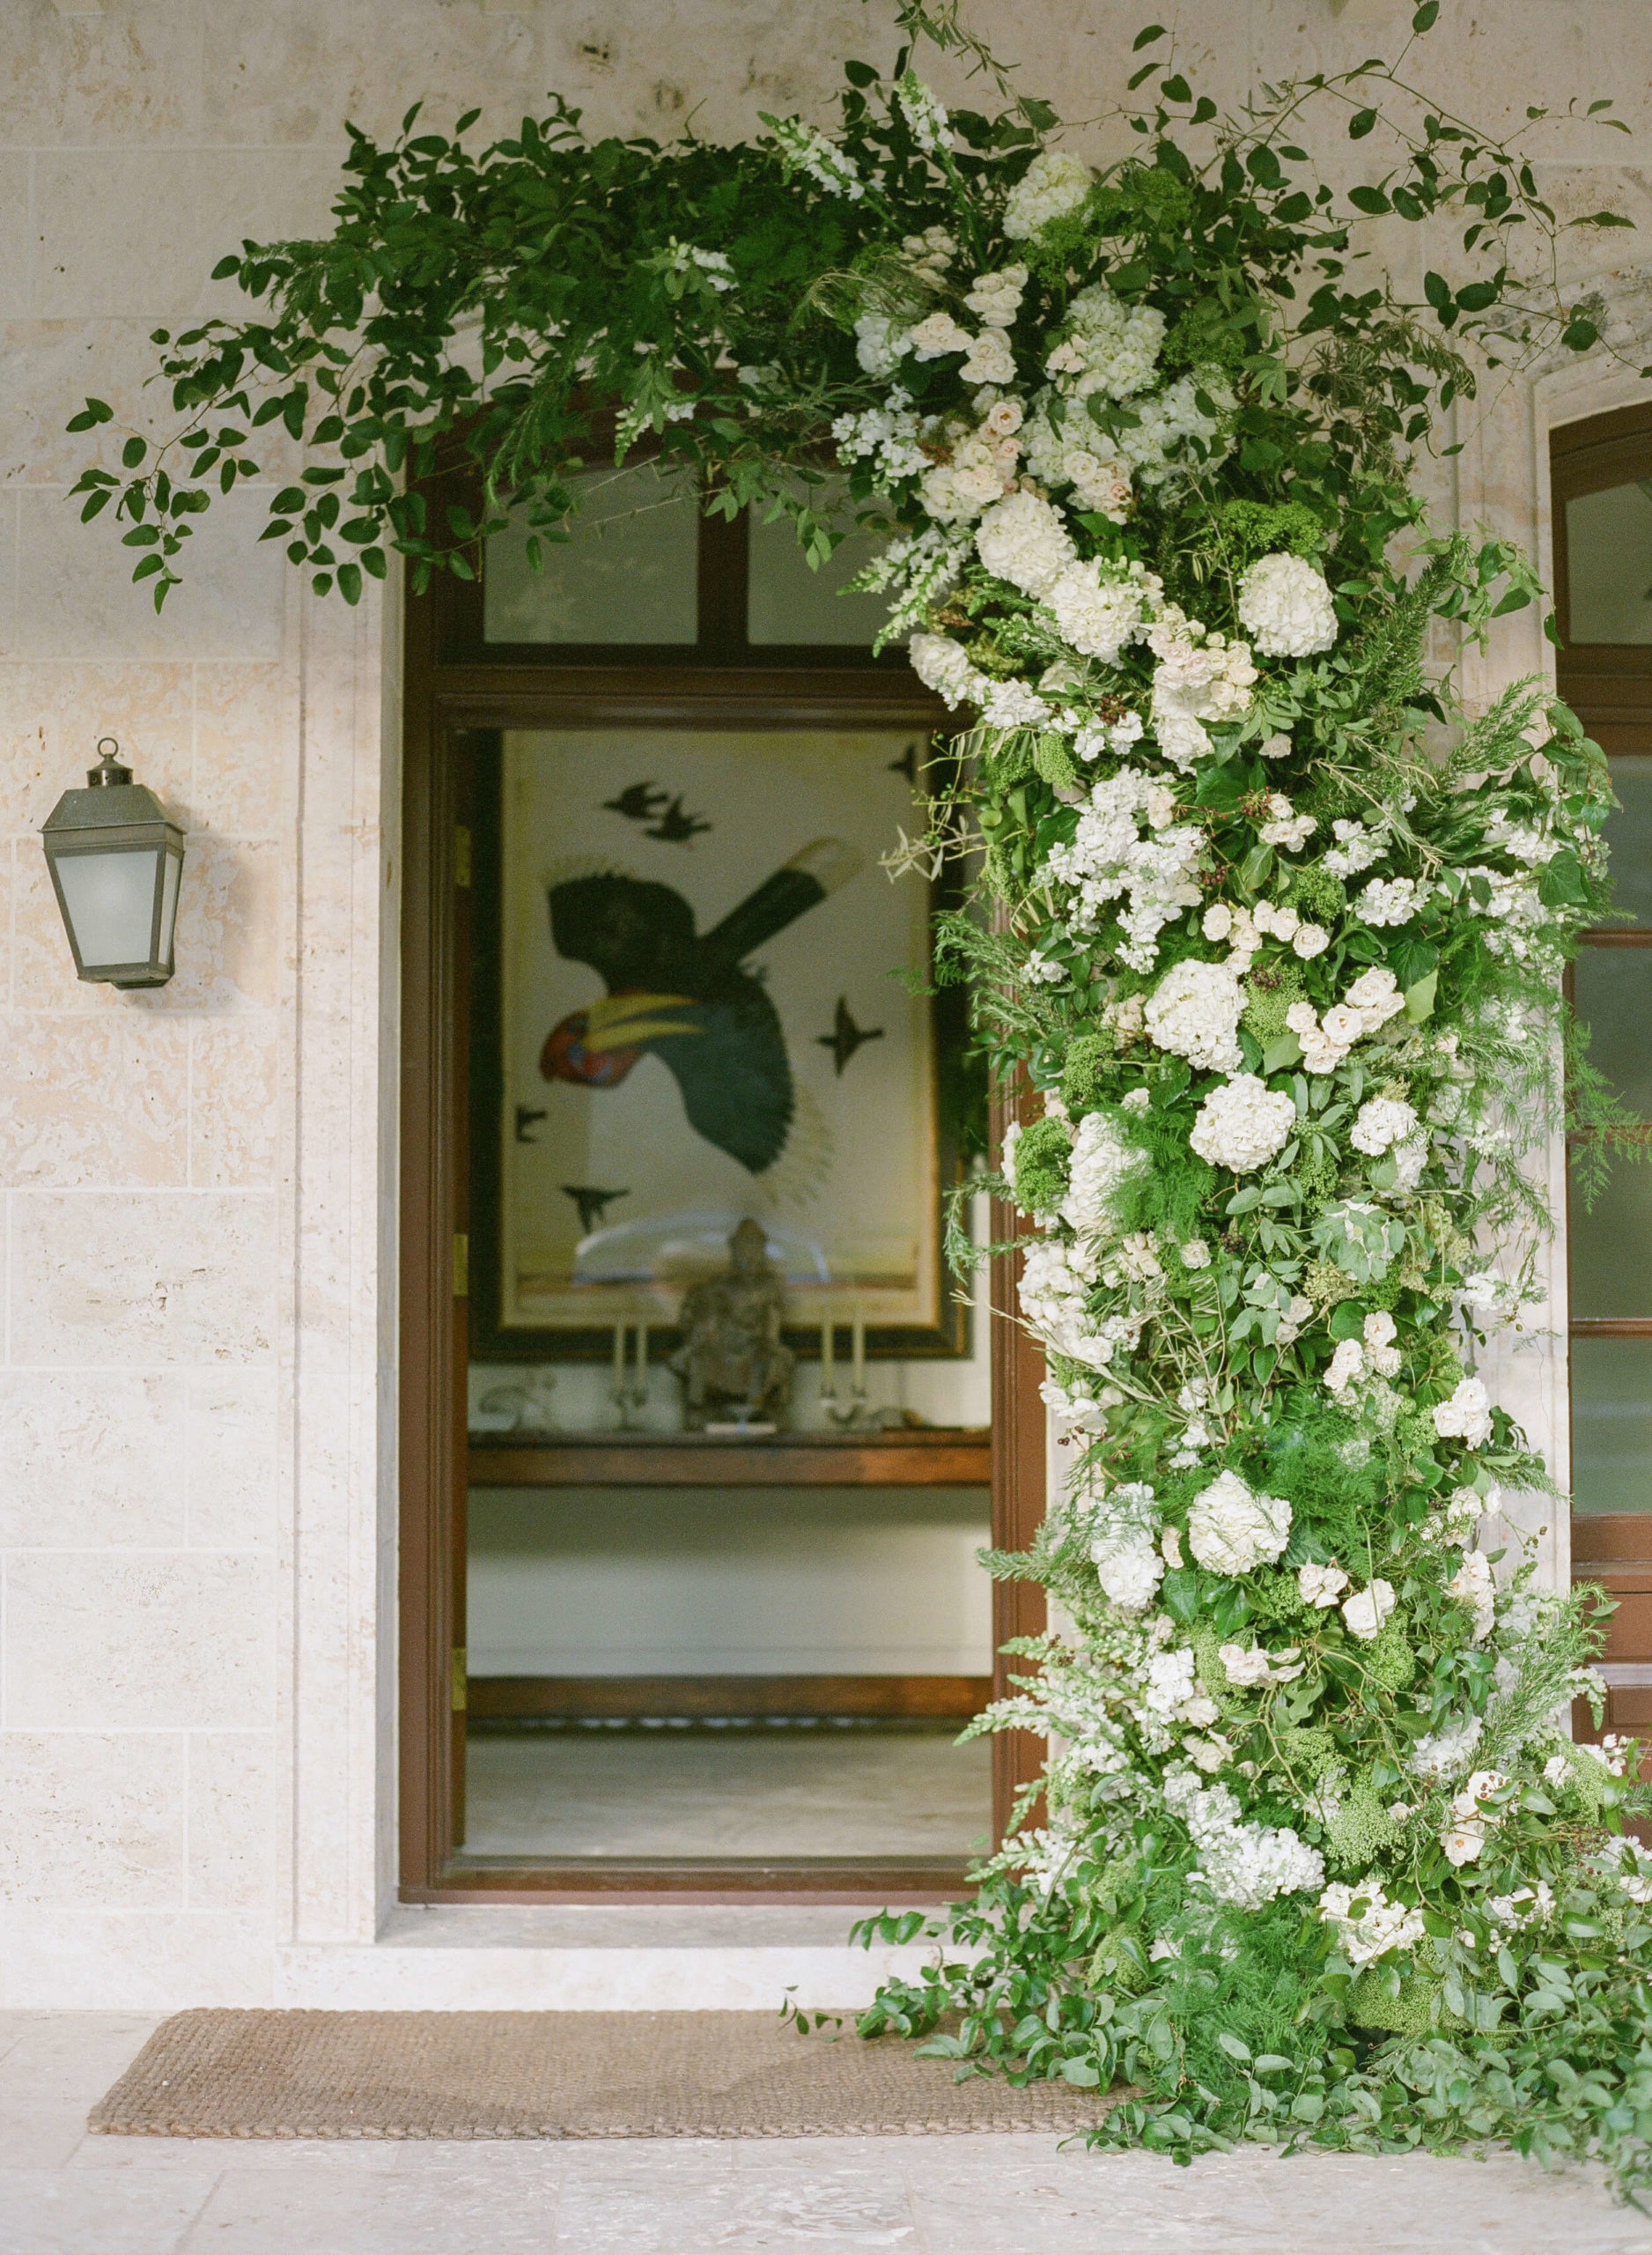 white floral arch over doorway to home